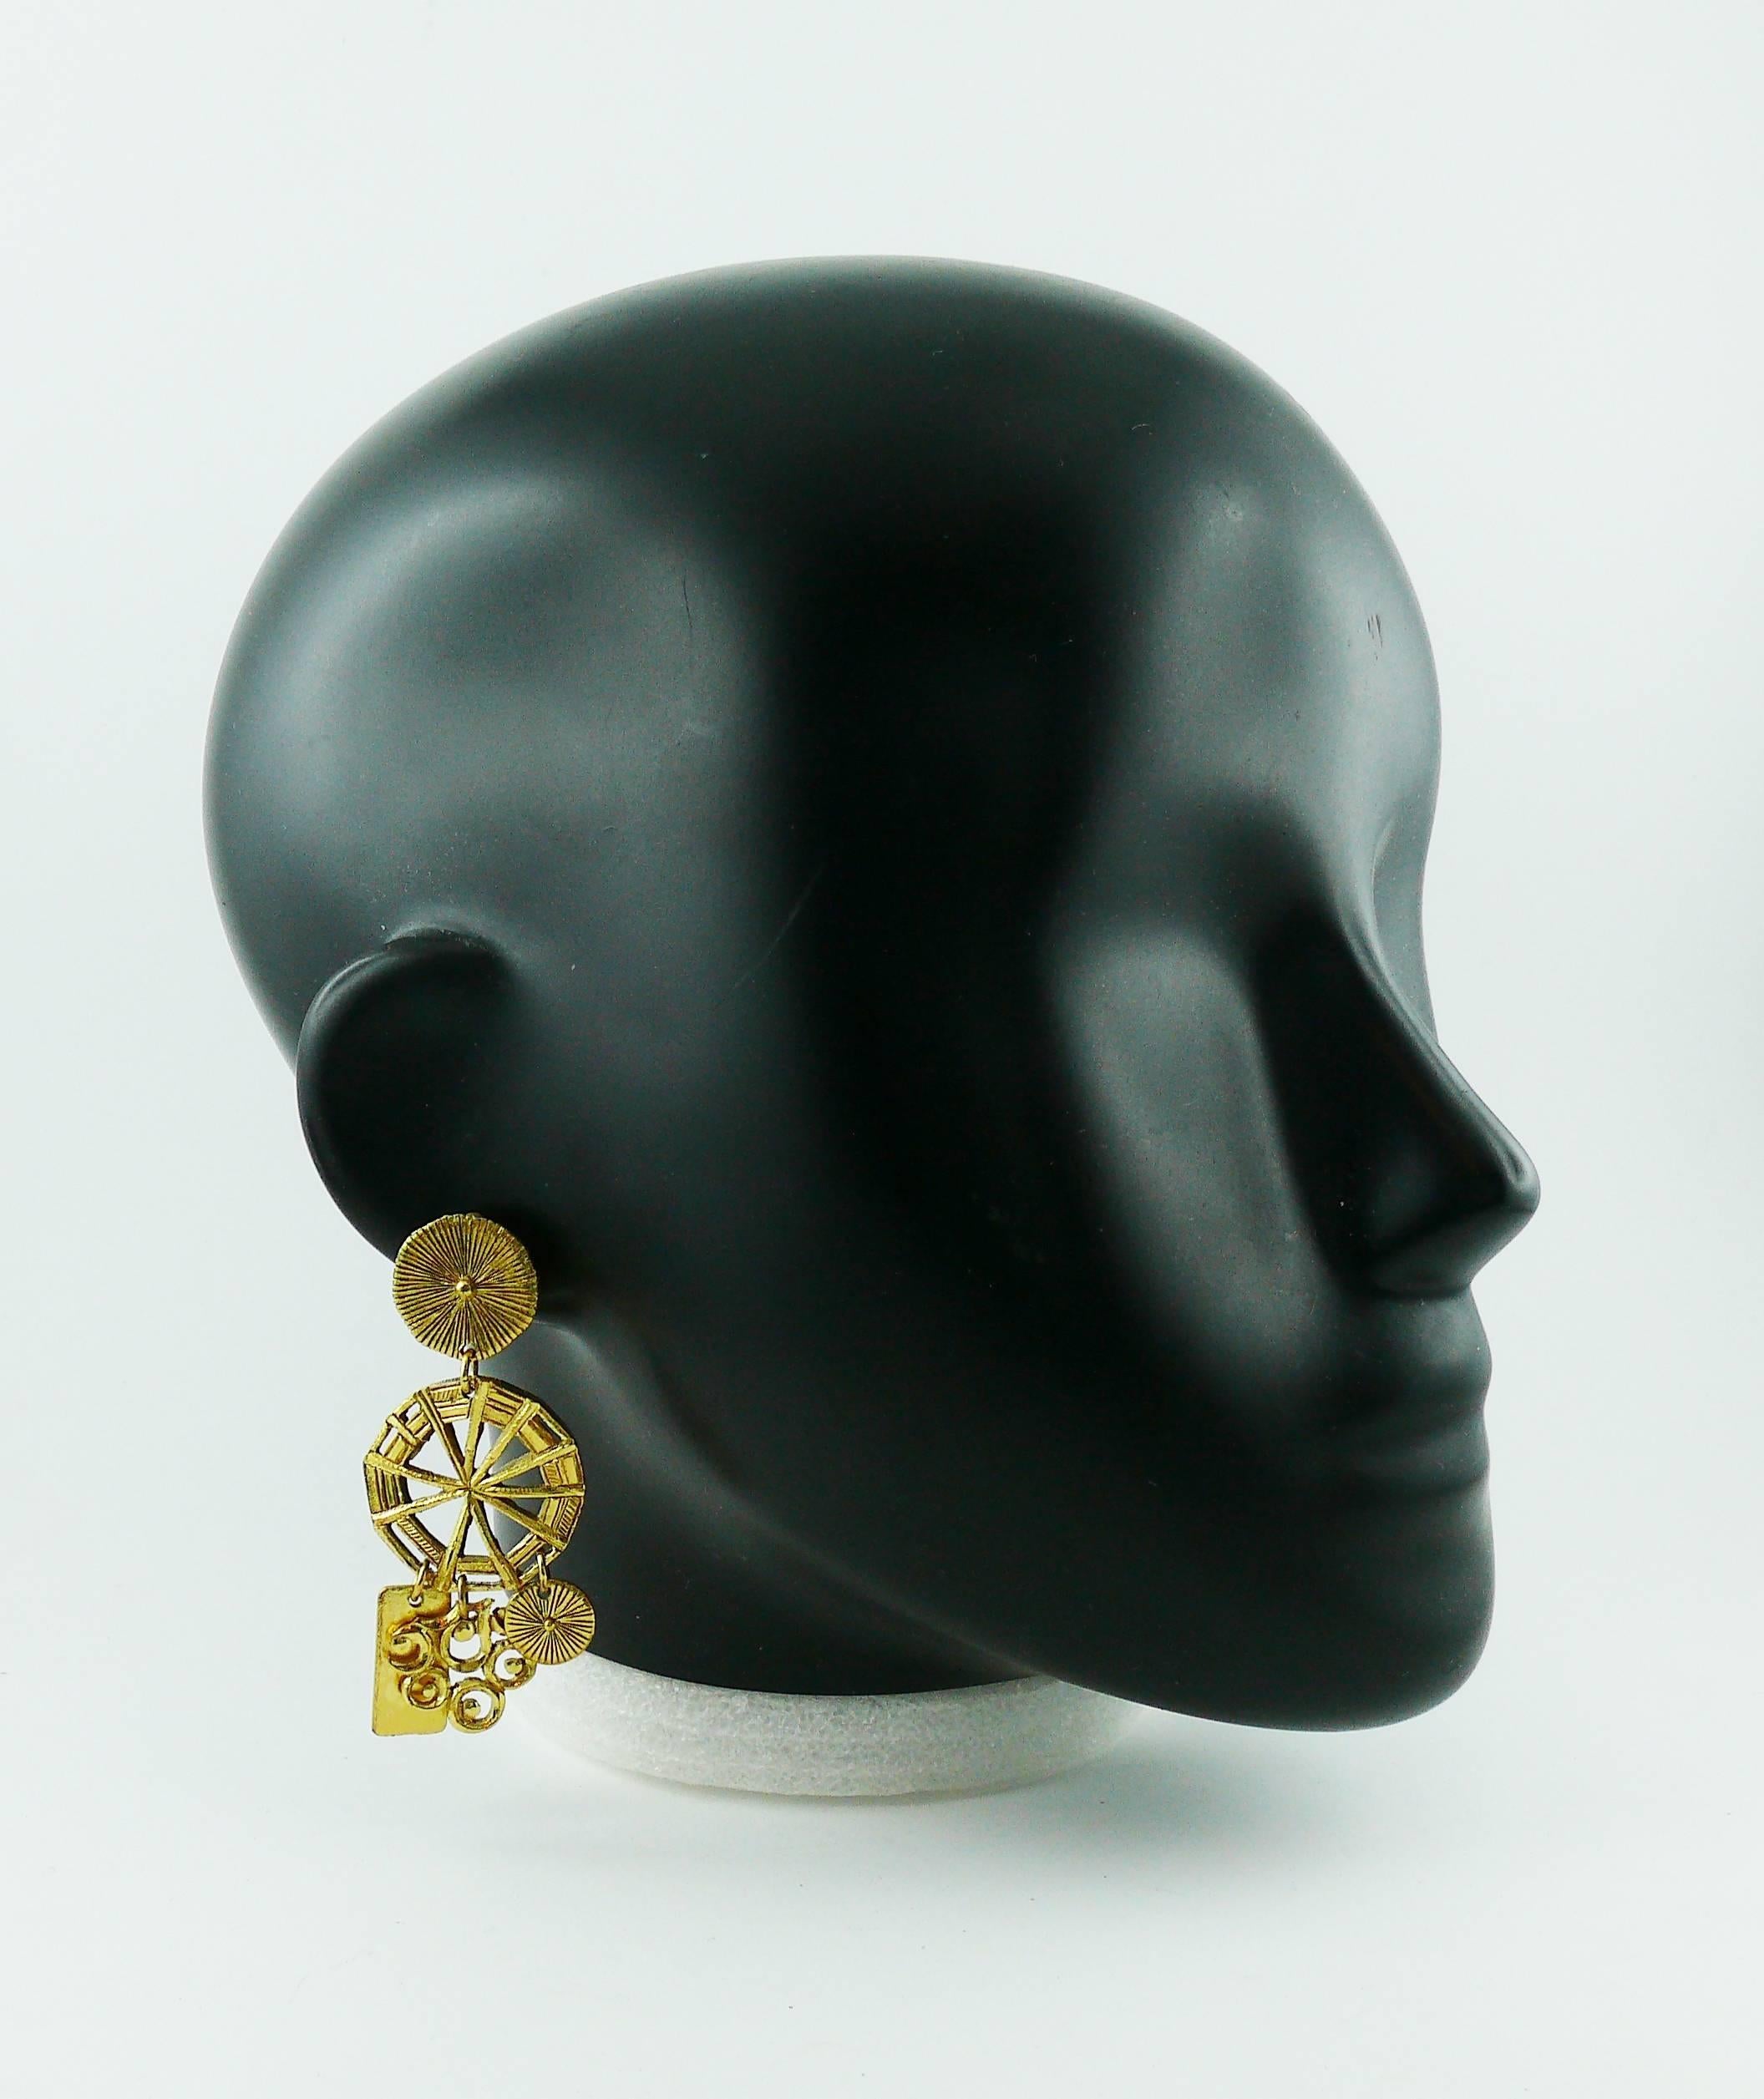 CHRISTIAN LACROIX vintage gold toned dangling earrings (clip-on) featuring a "wheel" design with charms.

Marked CHRISTIAN LACROIX CL Made in France.

Indicative measurements : height approx. 6.7 cm (2.64 inches) / max. diameter approx. 3